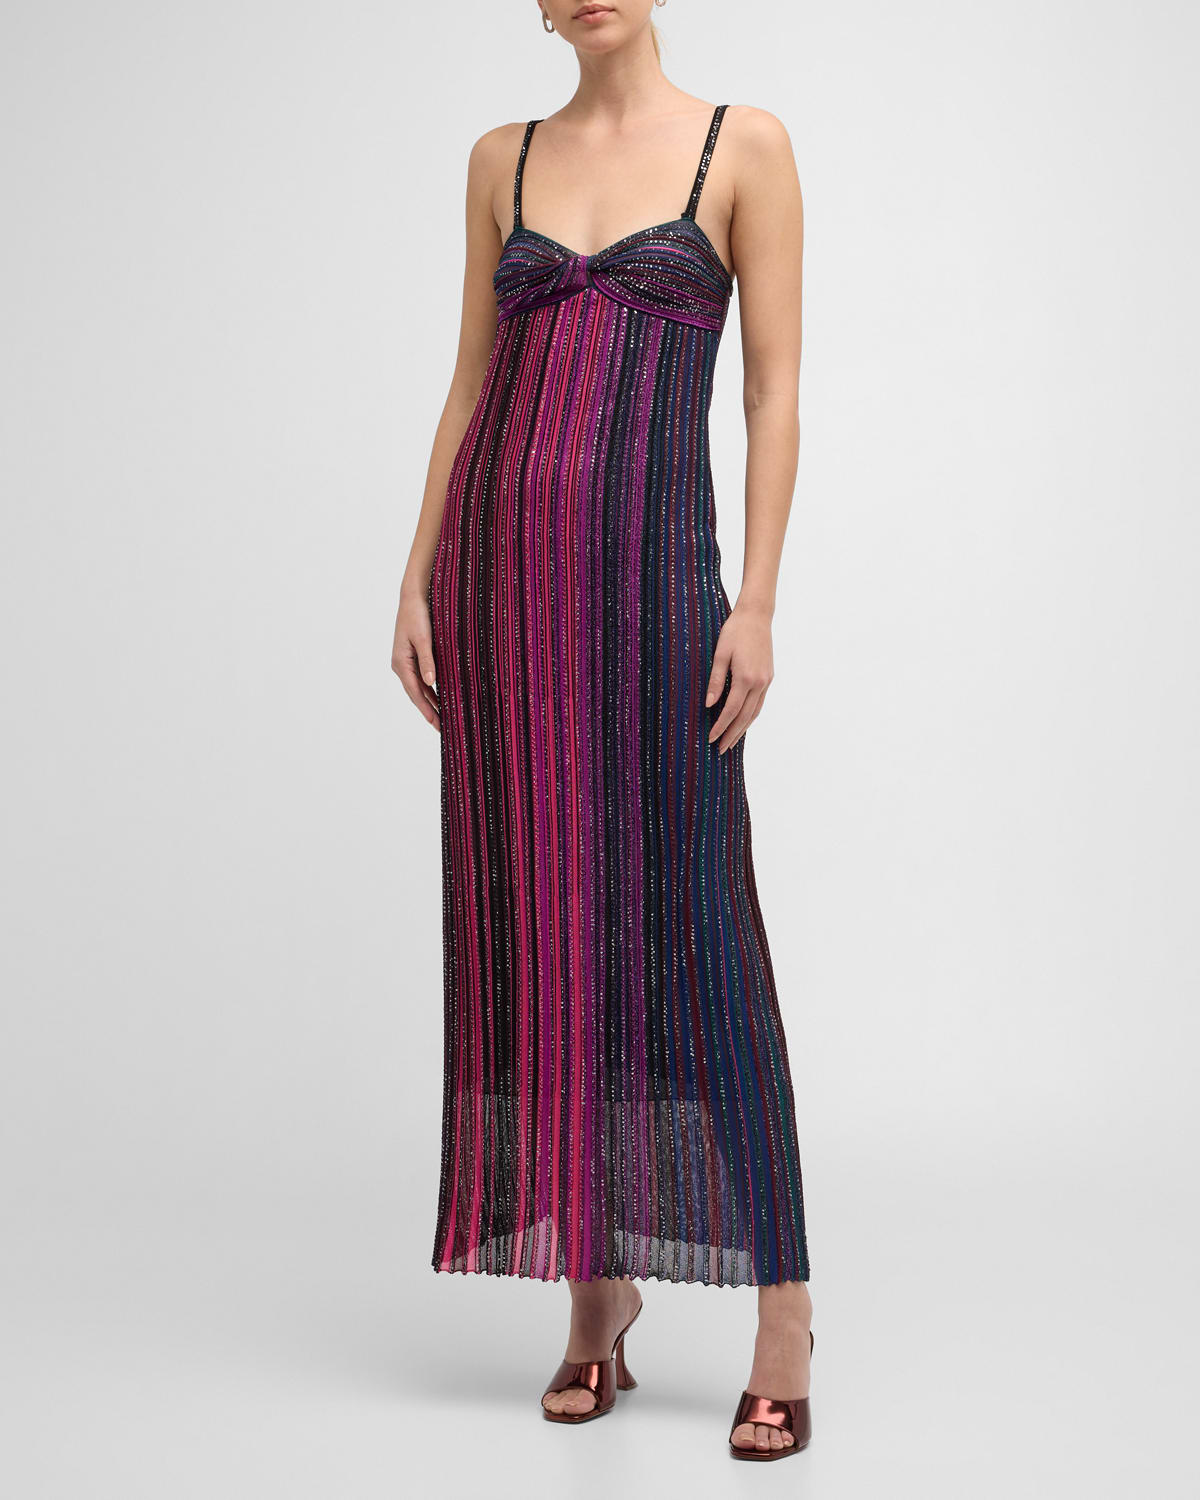 Twisted Empire-Waist Pleated Paillette Knit Maxi Dress